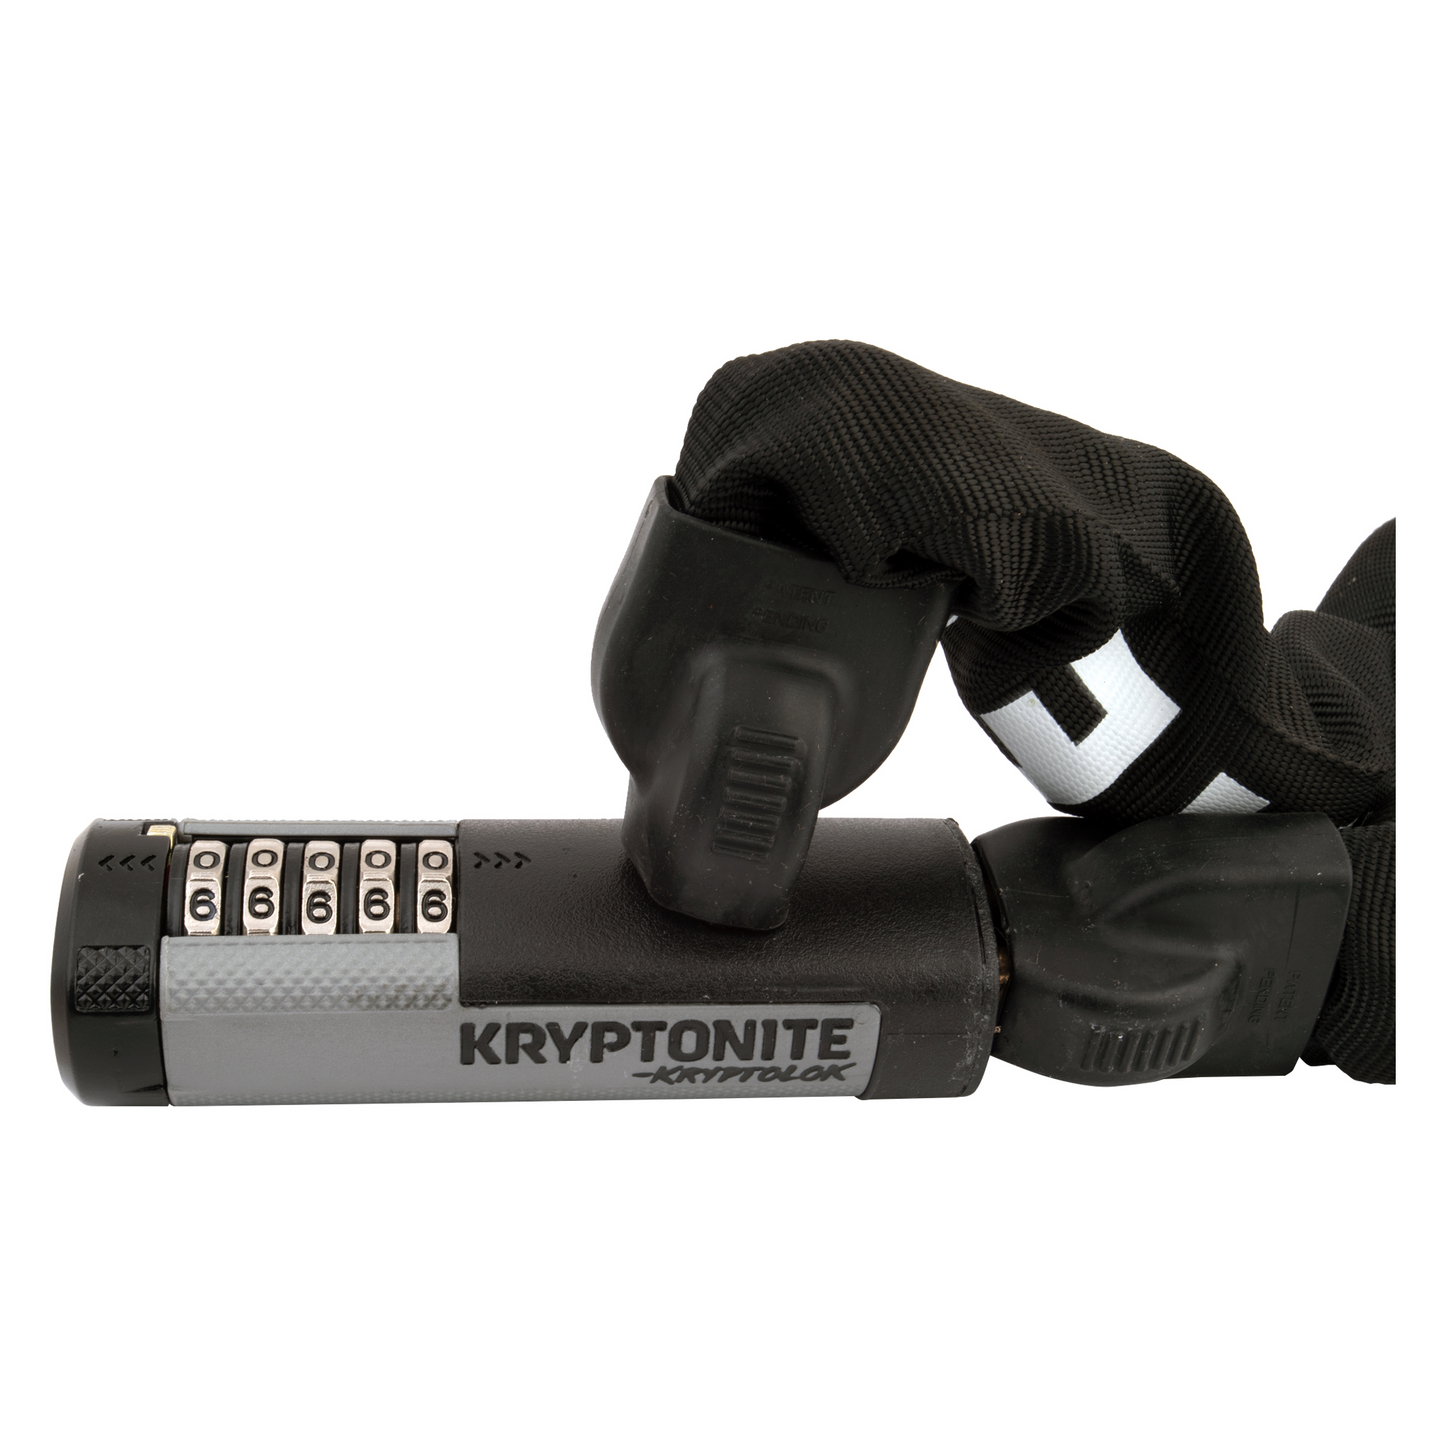 A Kryptonite Kryptolok 912 lock with a black handle for bicycle security.